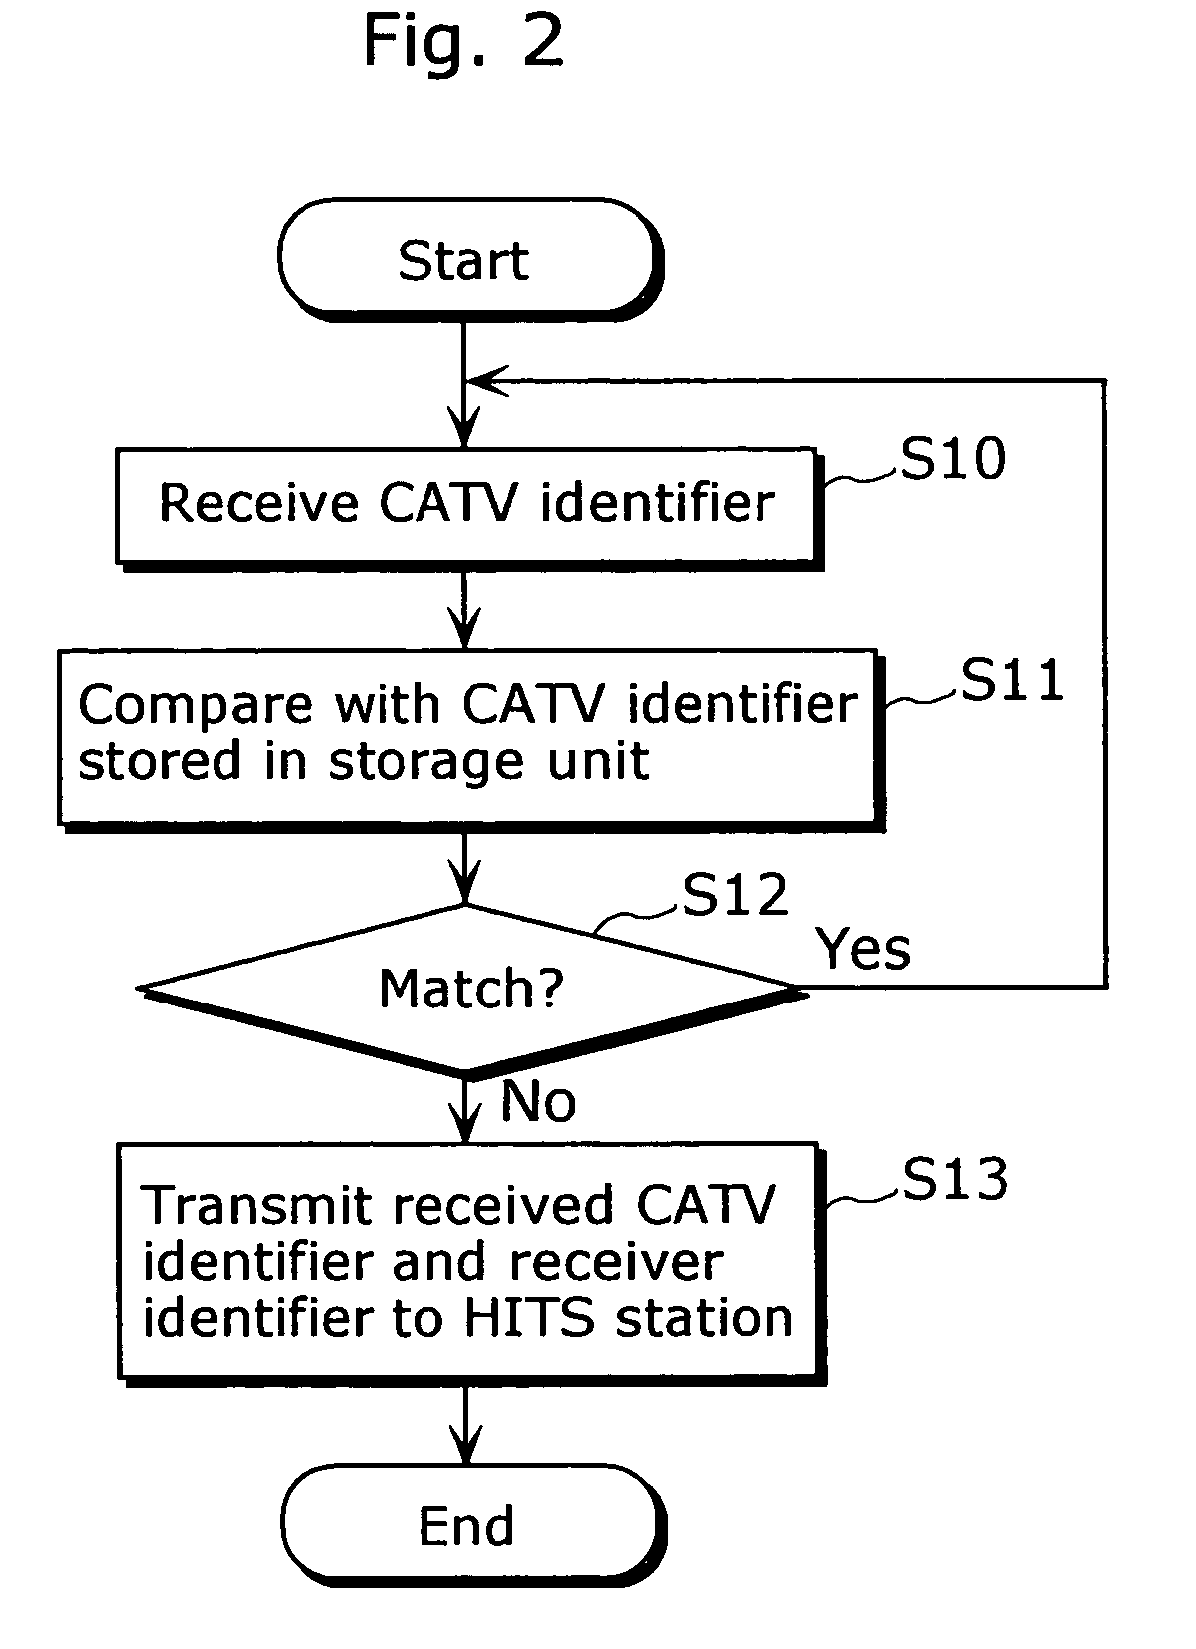 Conditional access system and receiver